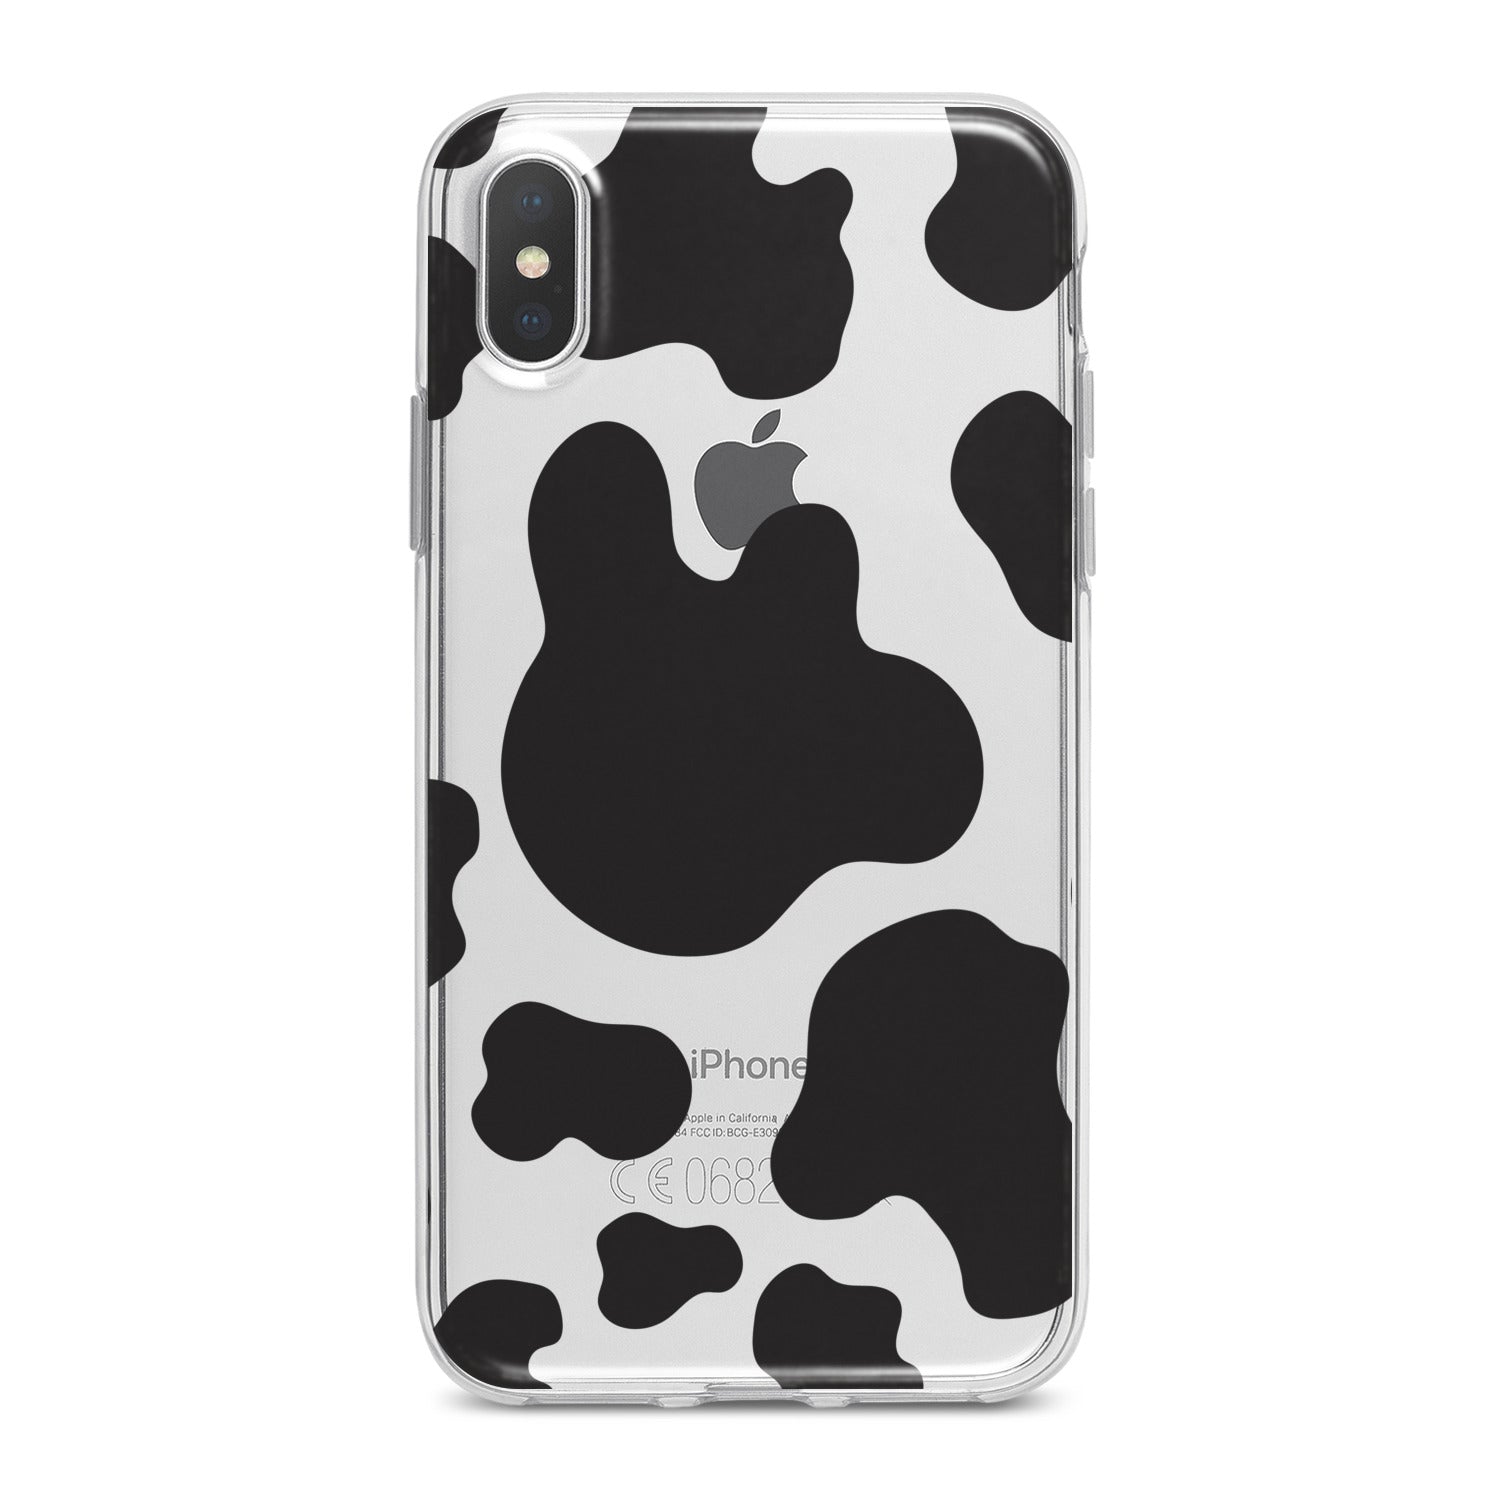 Lex Altern Black Leopard Pattern Phone Case for your iPhone & Android phone.